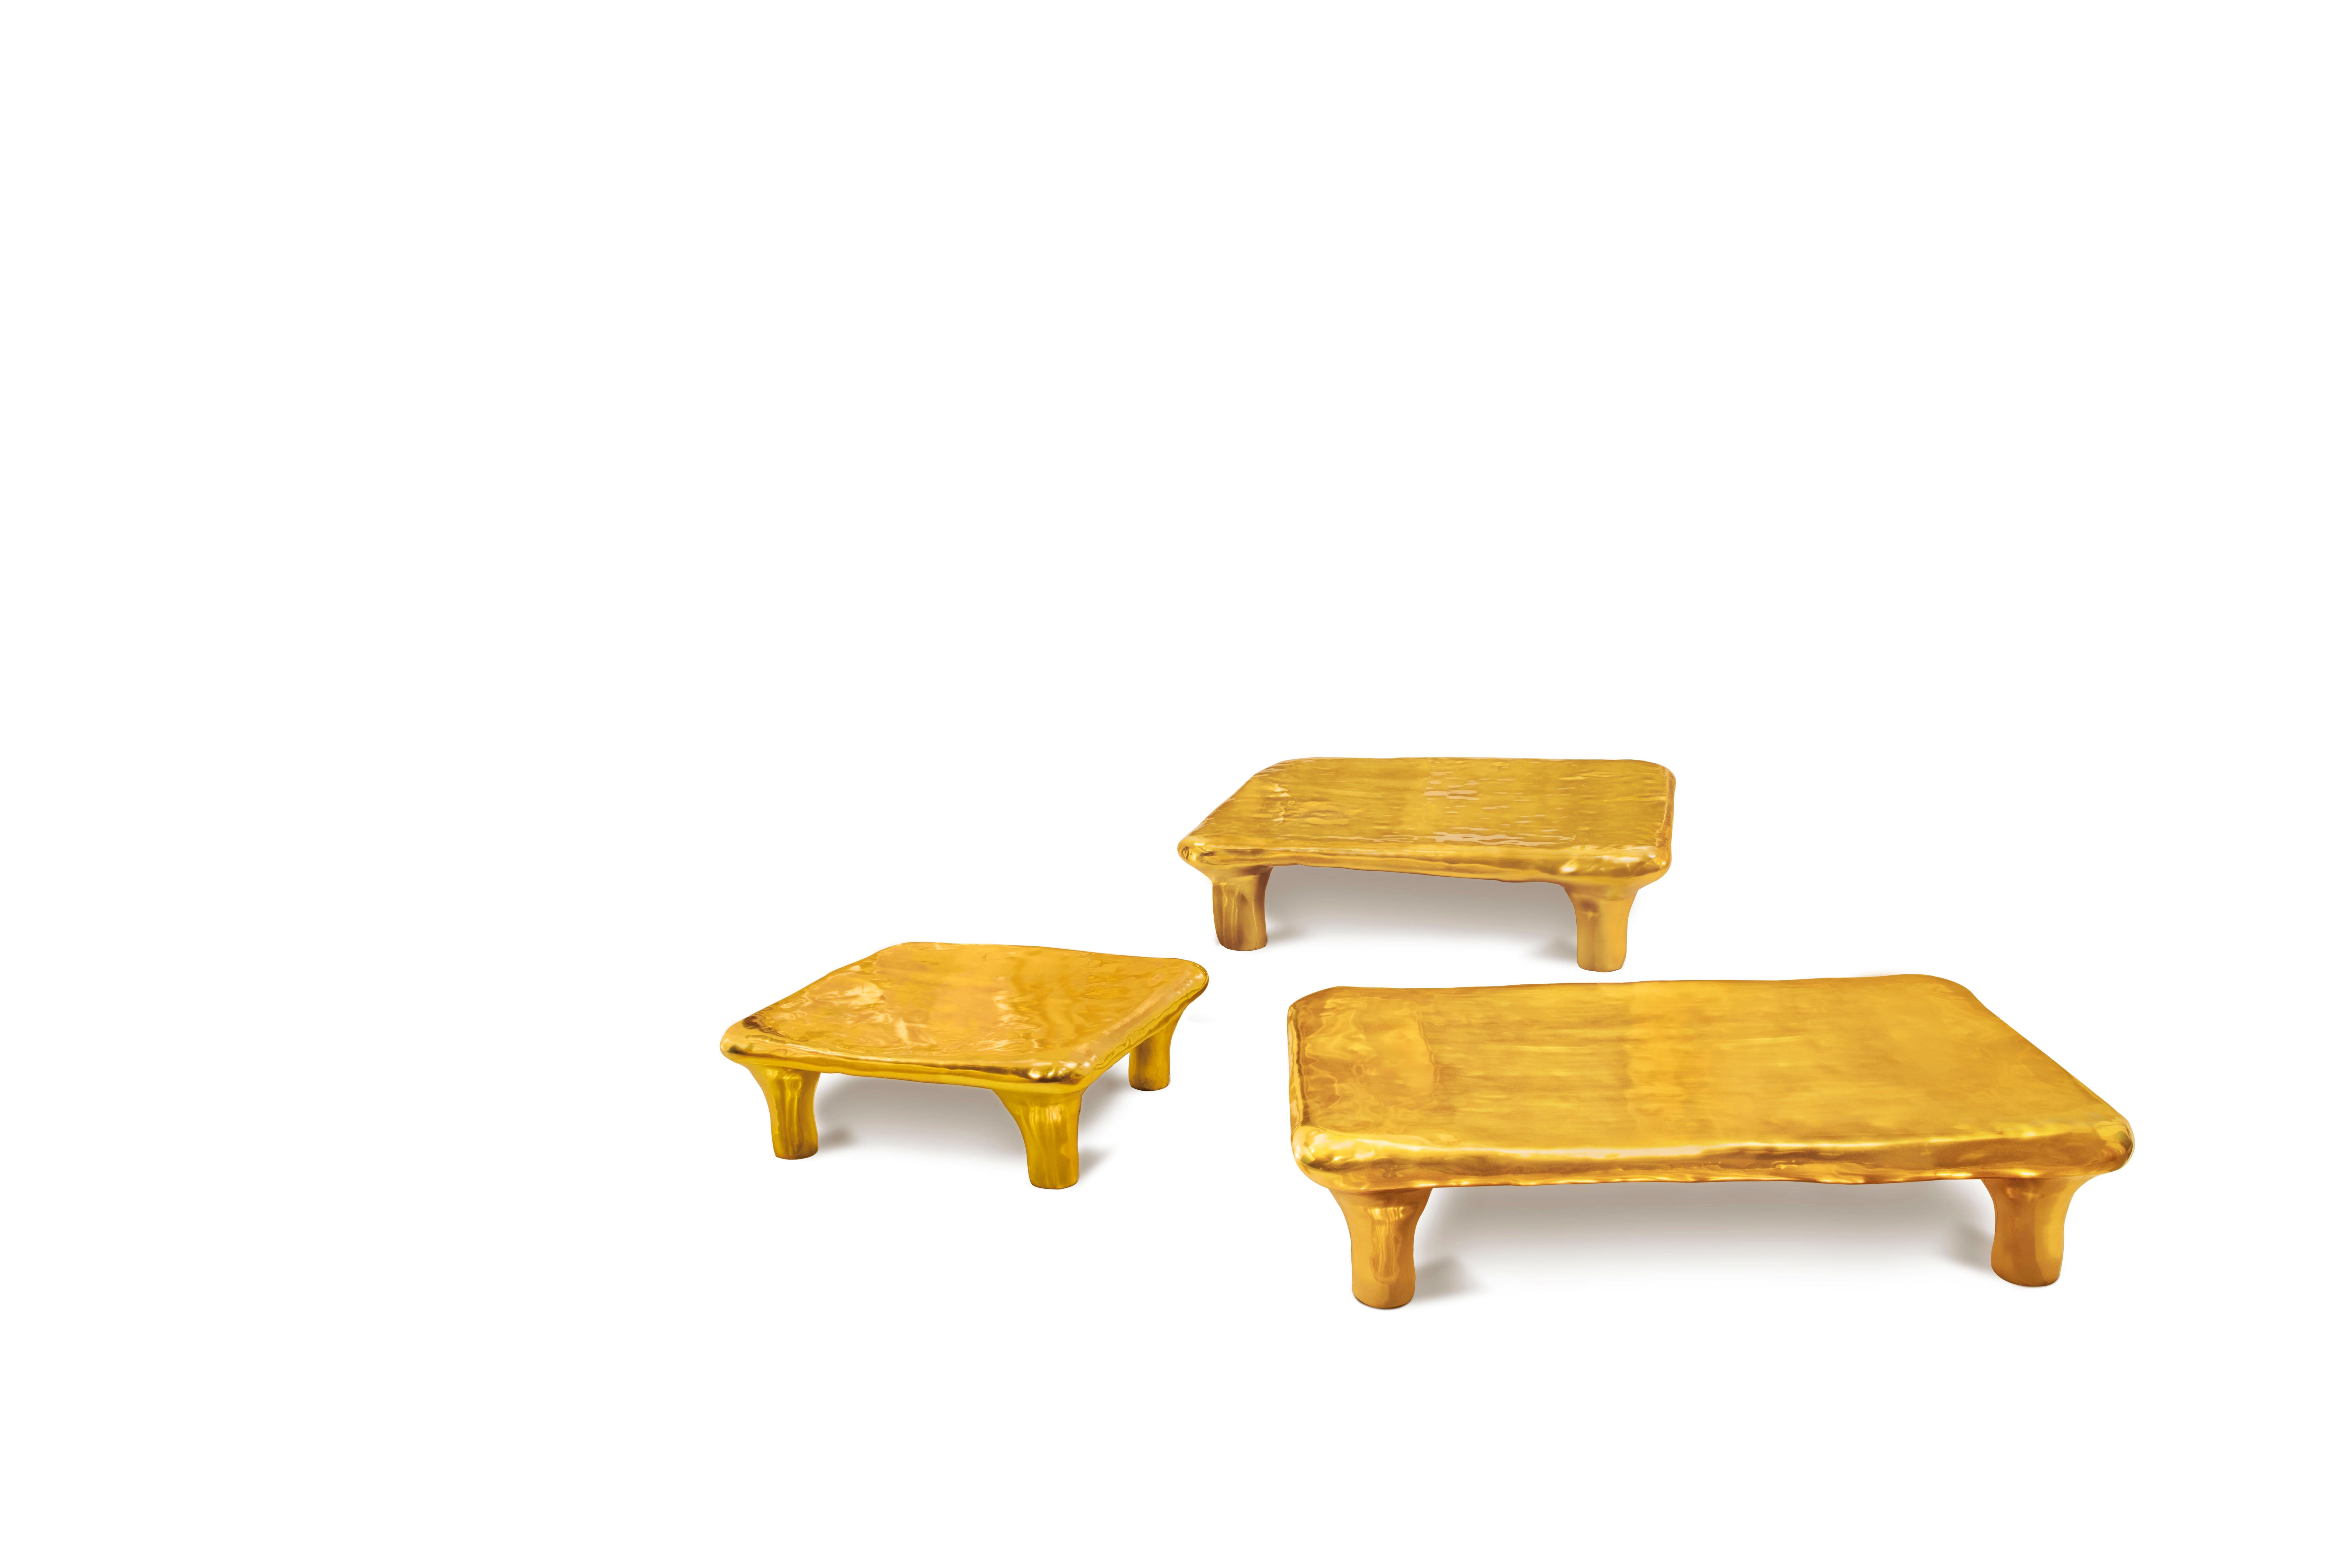 Euphoria Coffee Table in Brass by Scarlet Splendour is a square coffee table.

The Fools' Gold collection of amorphous forms, cast in brass, is a tribute to the heritage of Indian metal craftsmanship. India, in fact, is one of the largest brass